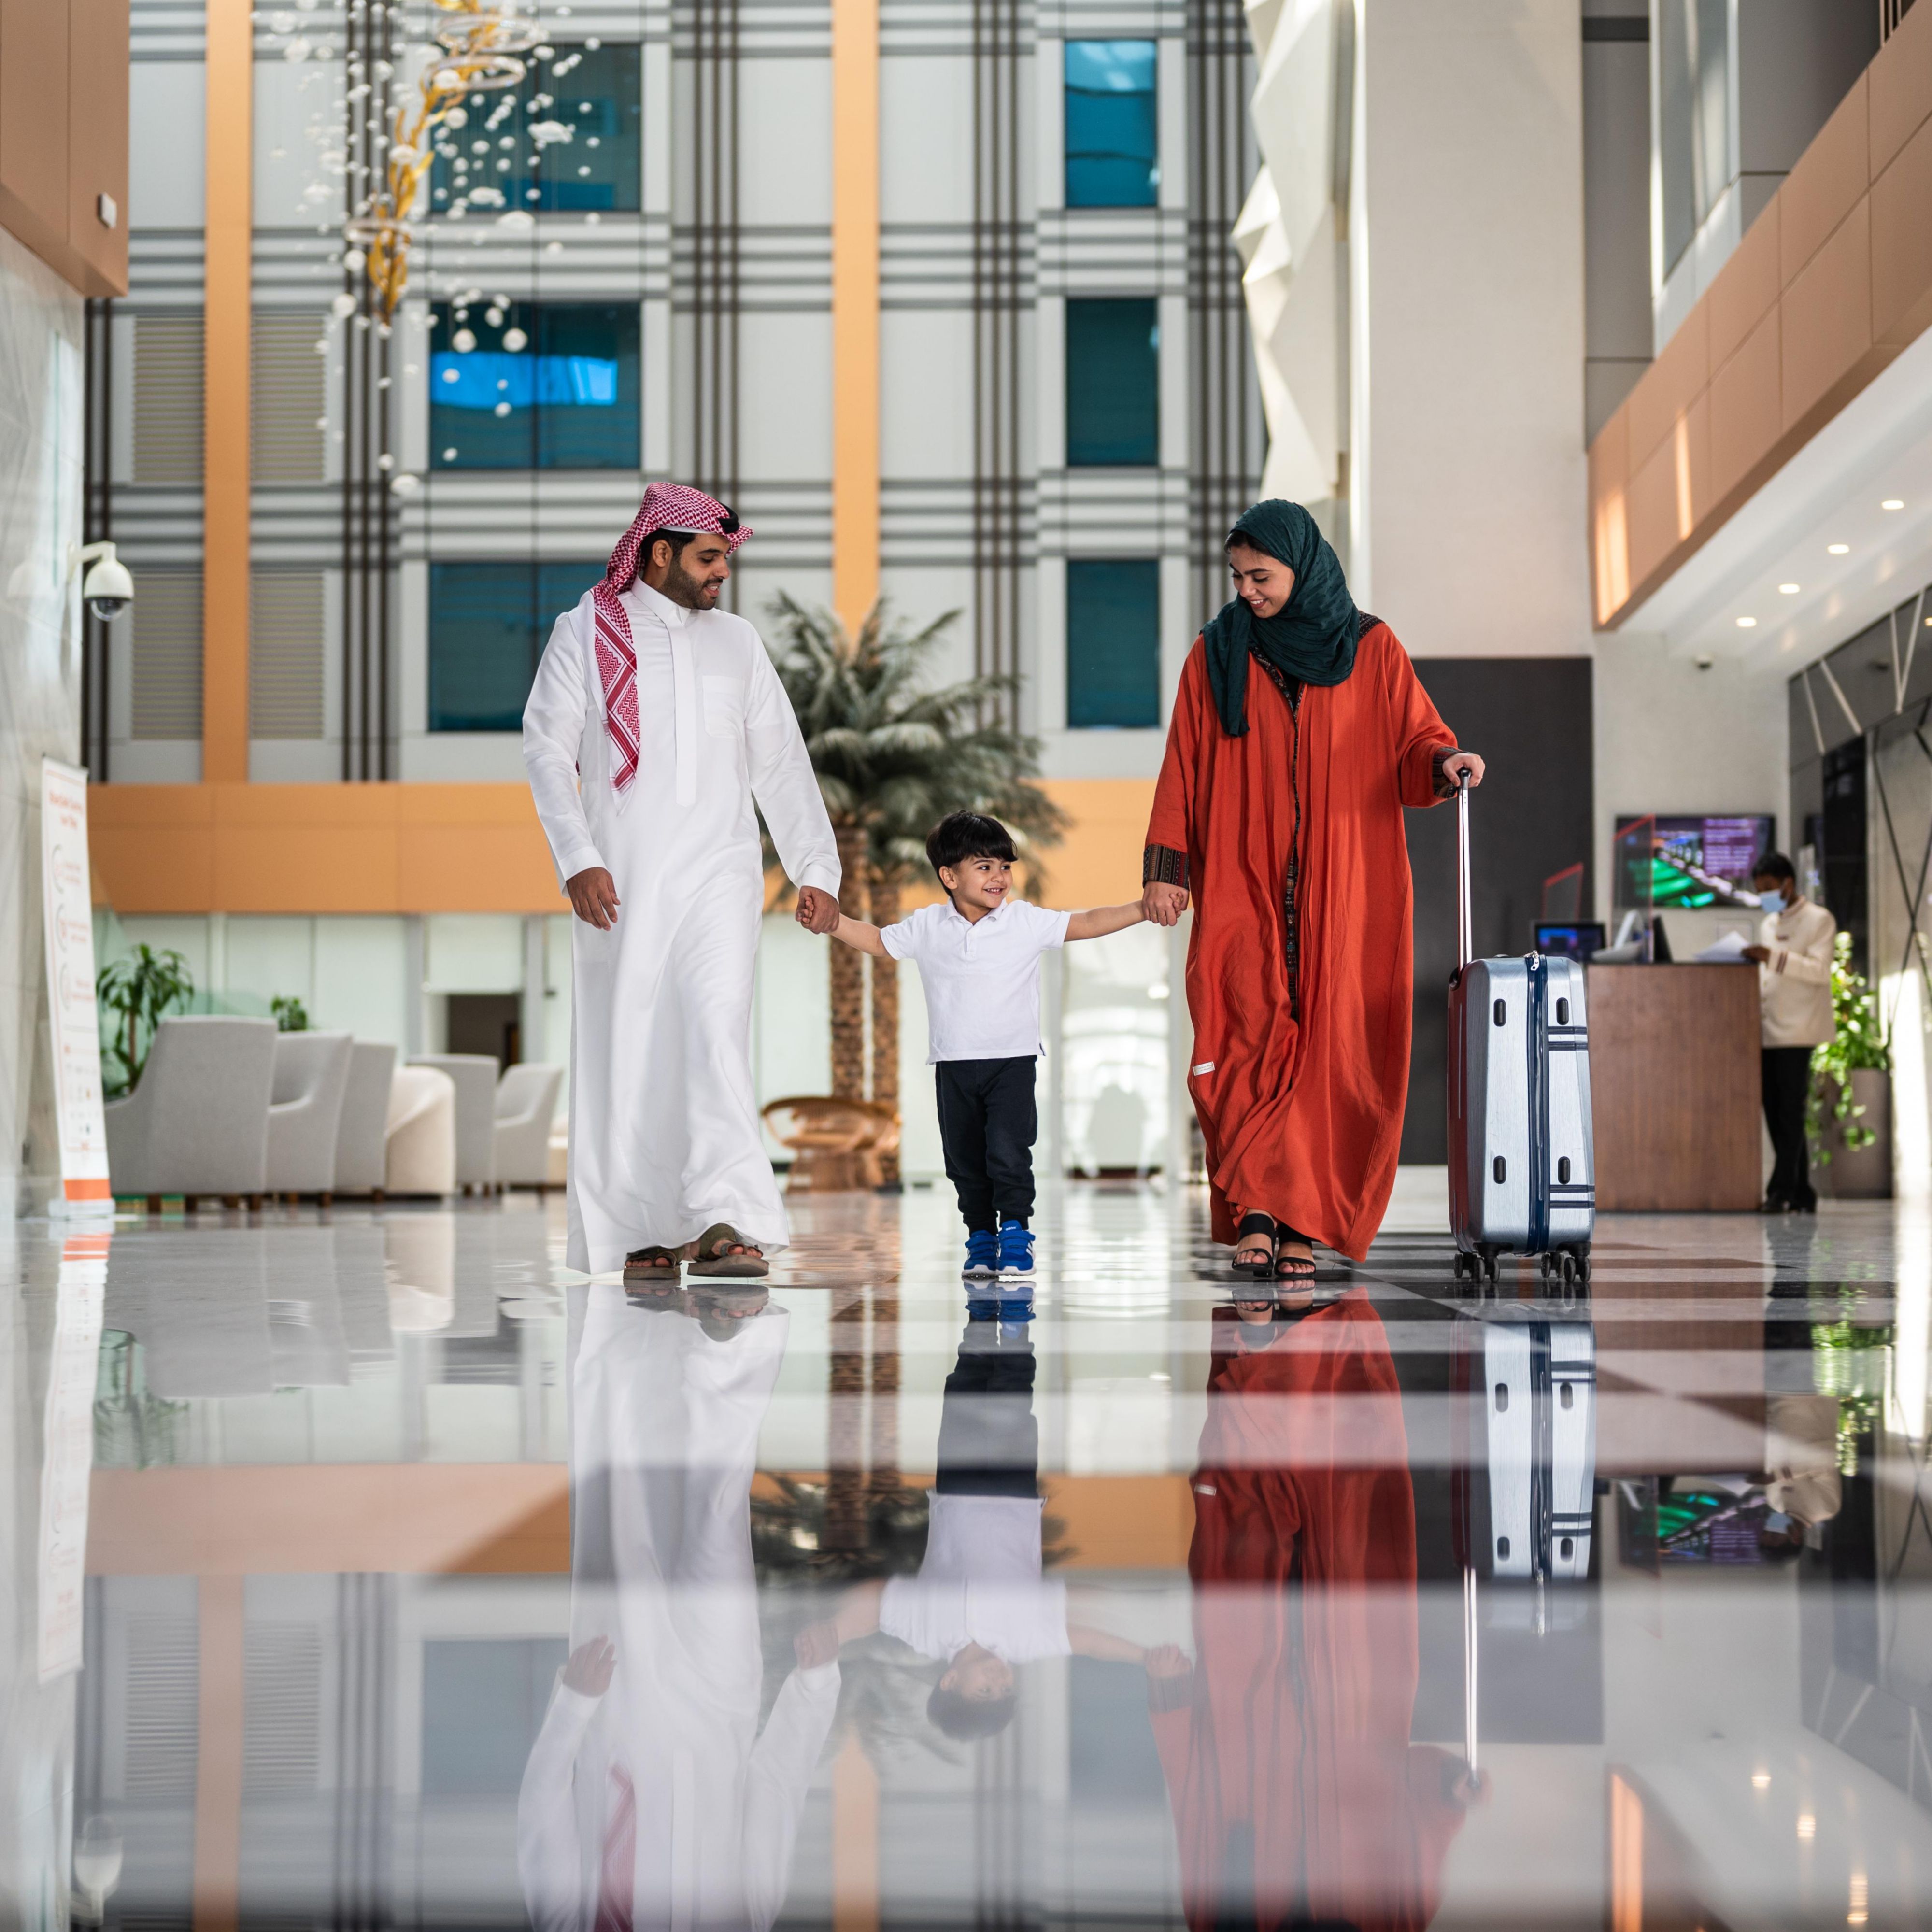 Capture your cherished family moments at our new hotel lobby